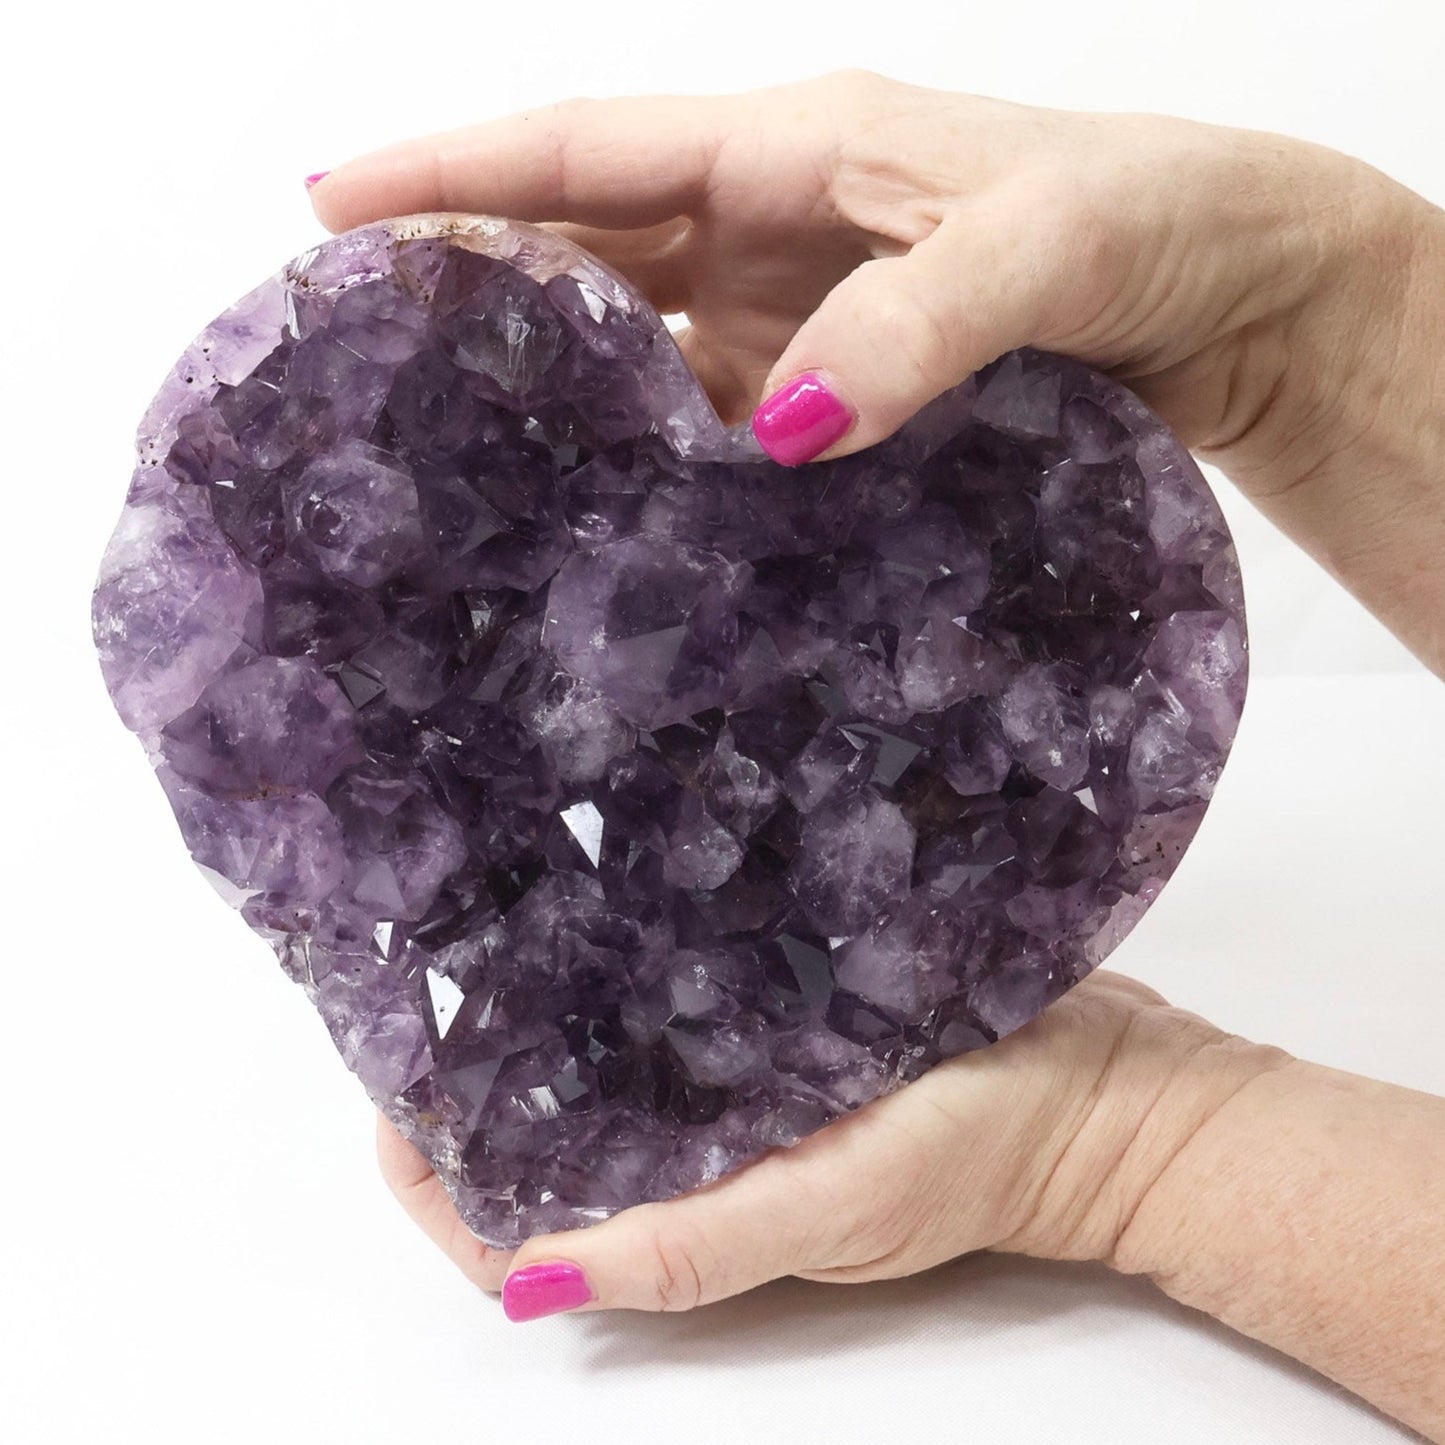 Large Amethyst Geode Heart with Stand